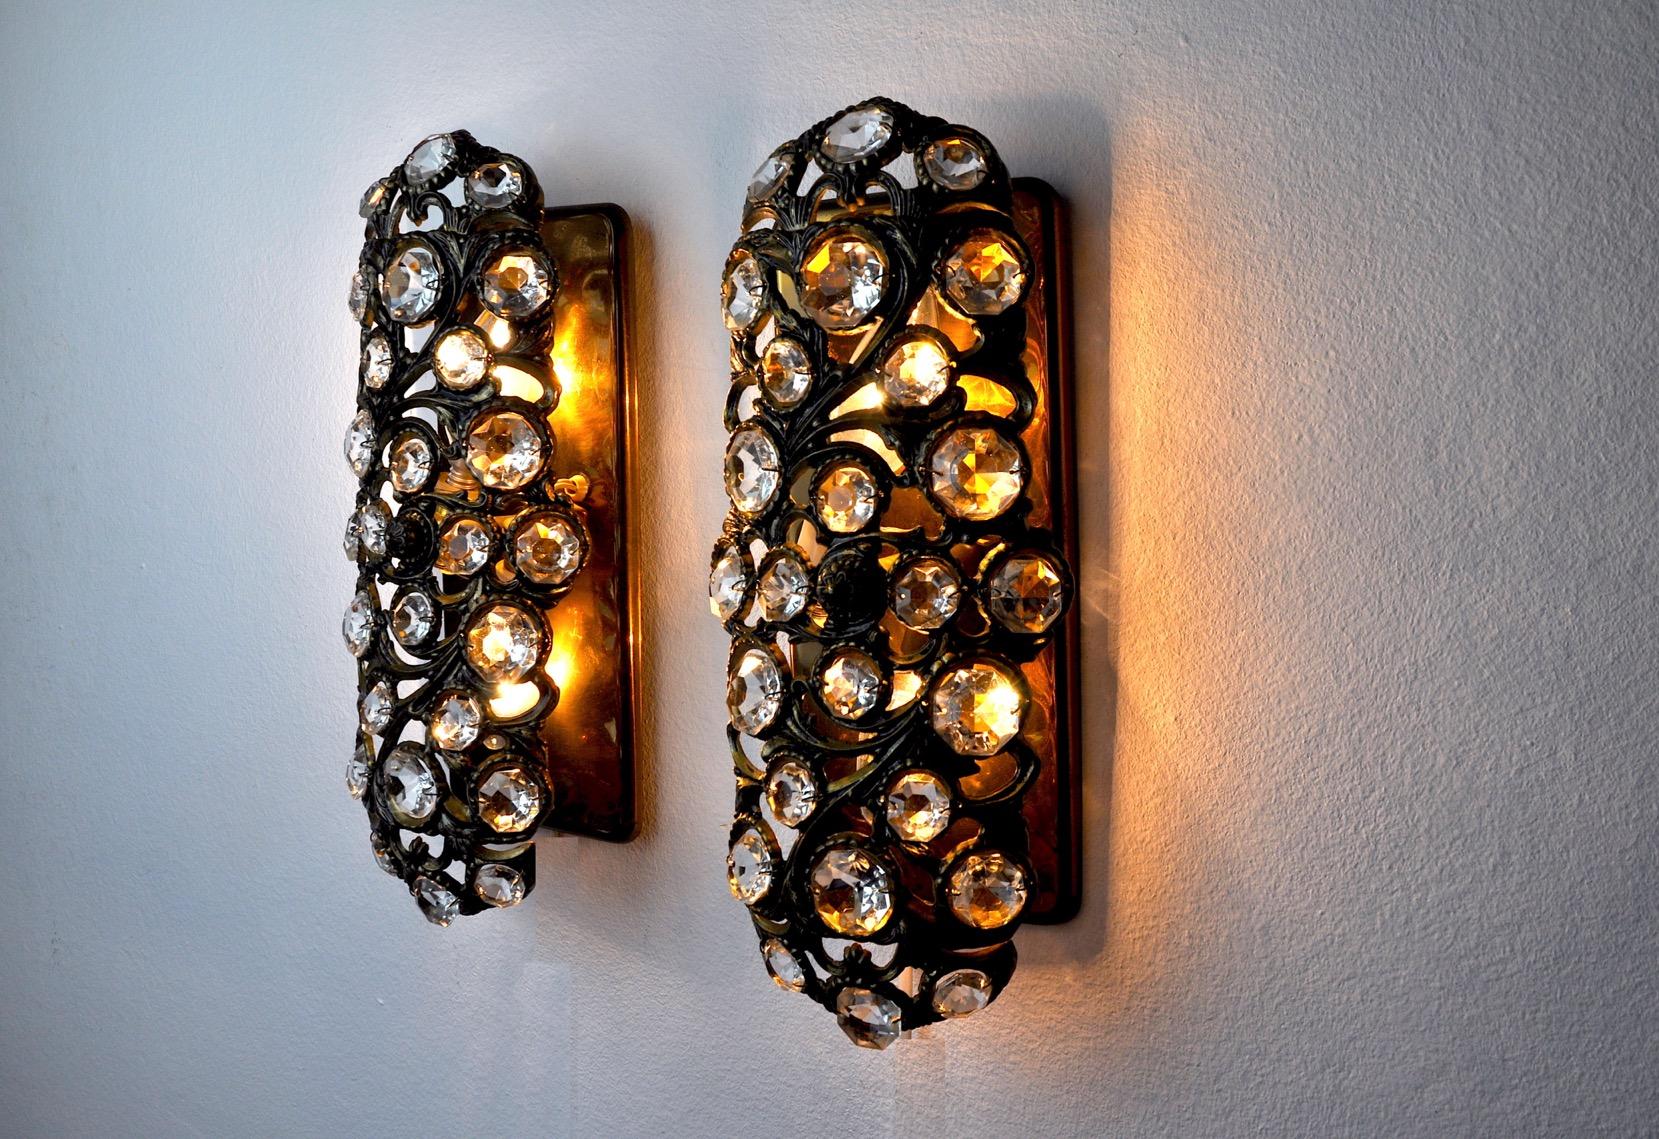 Rare pair of palwa wall lamps designated by ernest palm and produced in the 60s in Barcelona.

Brass structure composed of crystals cut in perfect state of conservation.

Rare design object that will illuminate your interior